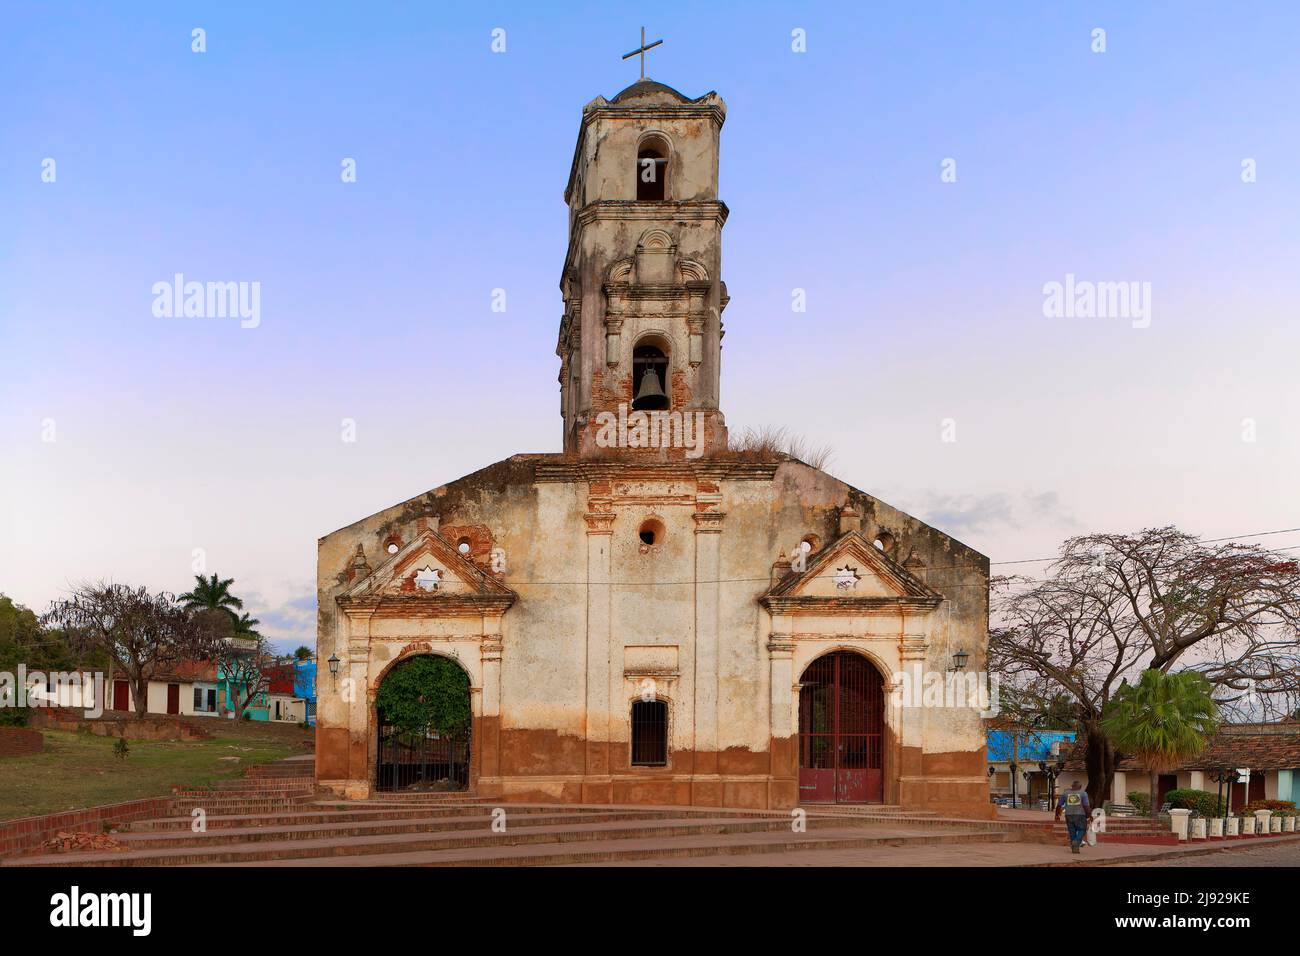 Morbid, old church with bell tower, old town, Trinidad, UNESCO World Heritage Site, Sancti Spiritus province, Cuba, West Indies, Caribbean Stock Photo